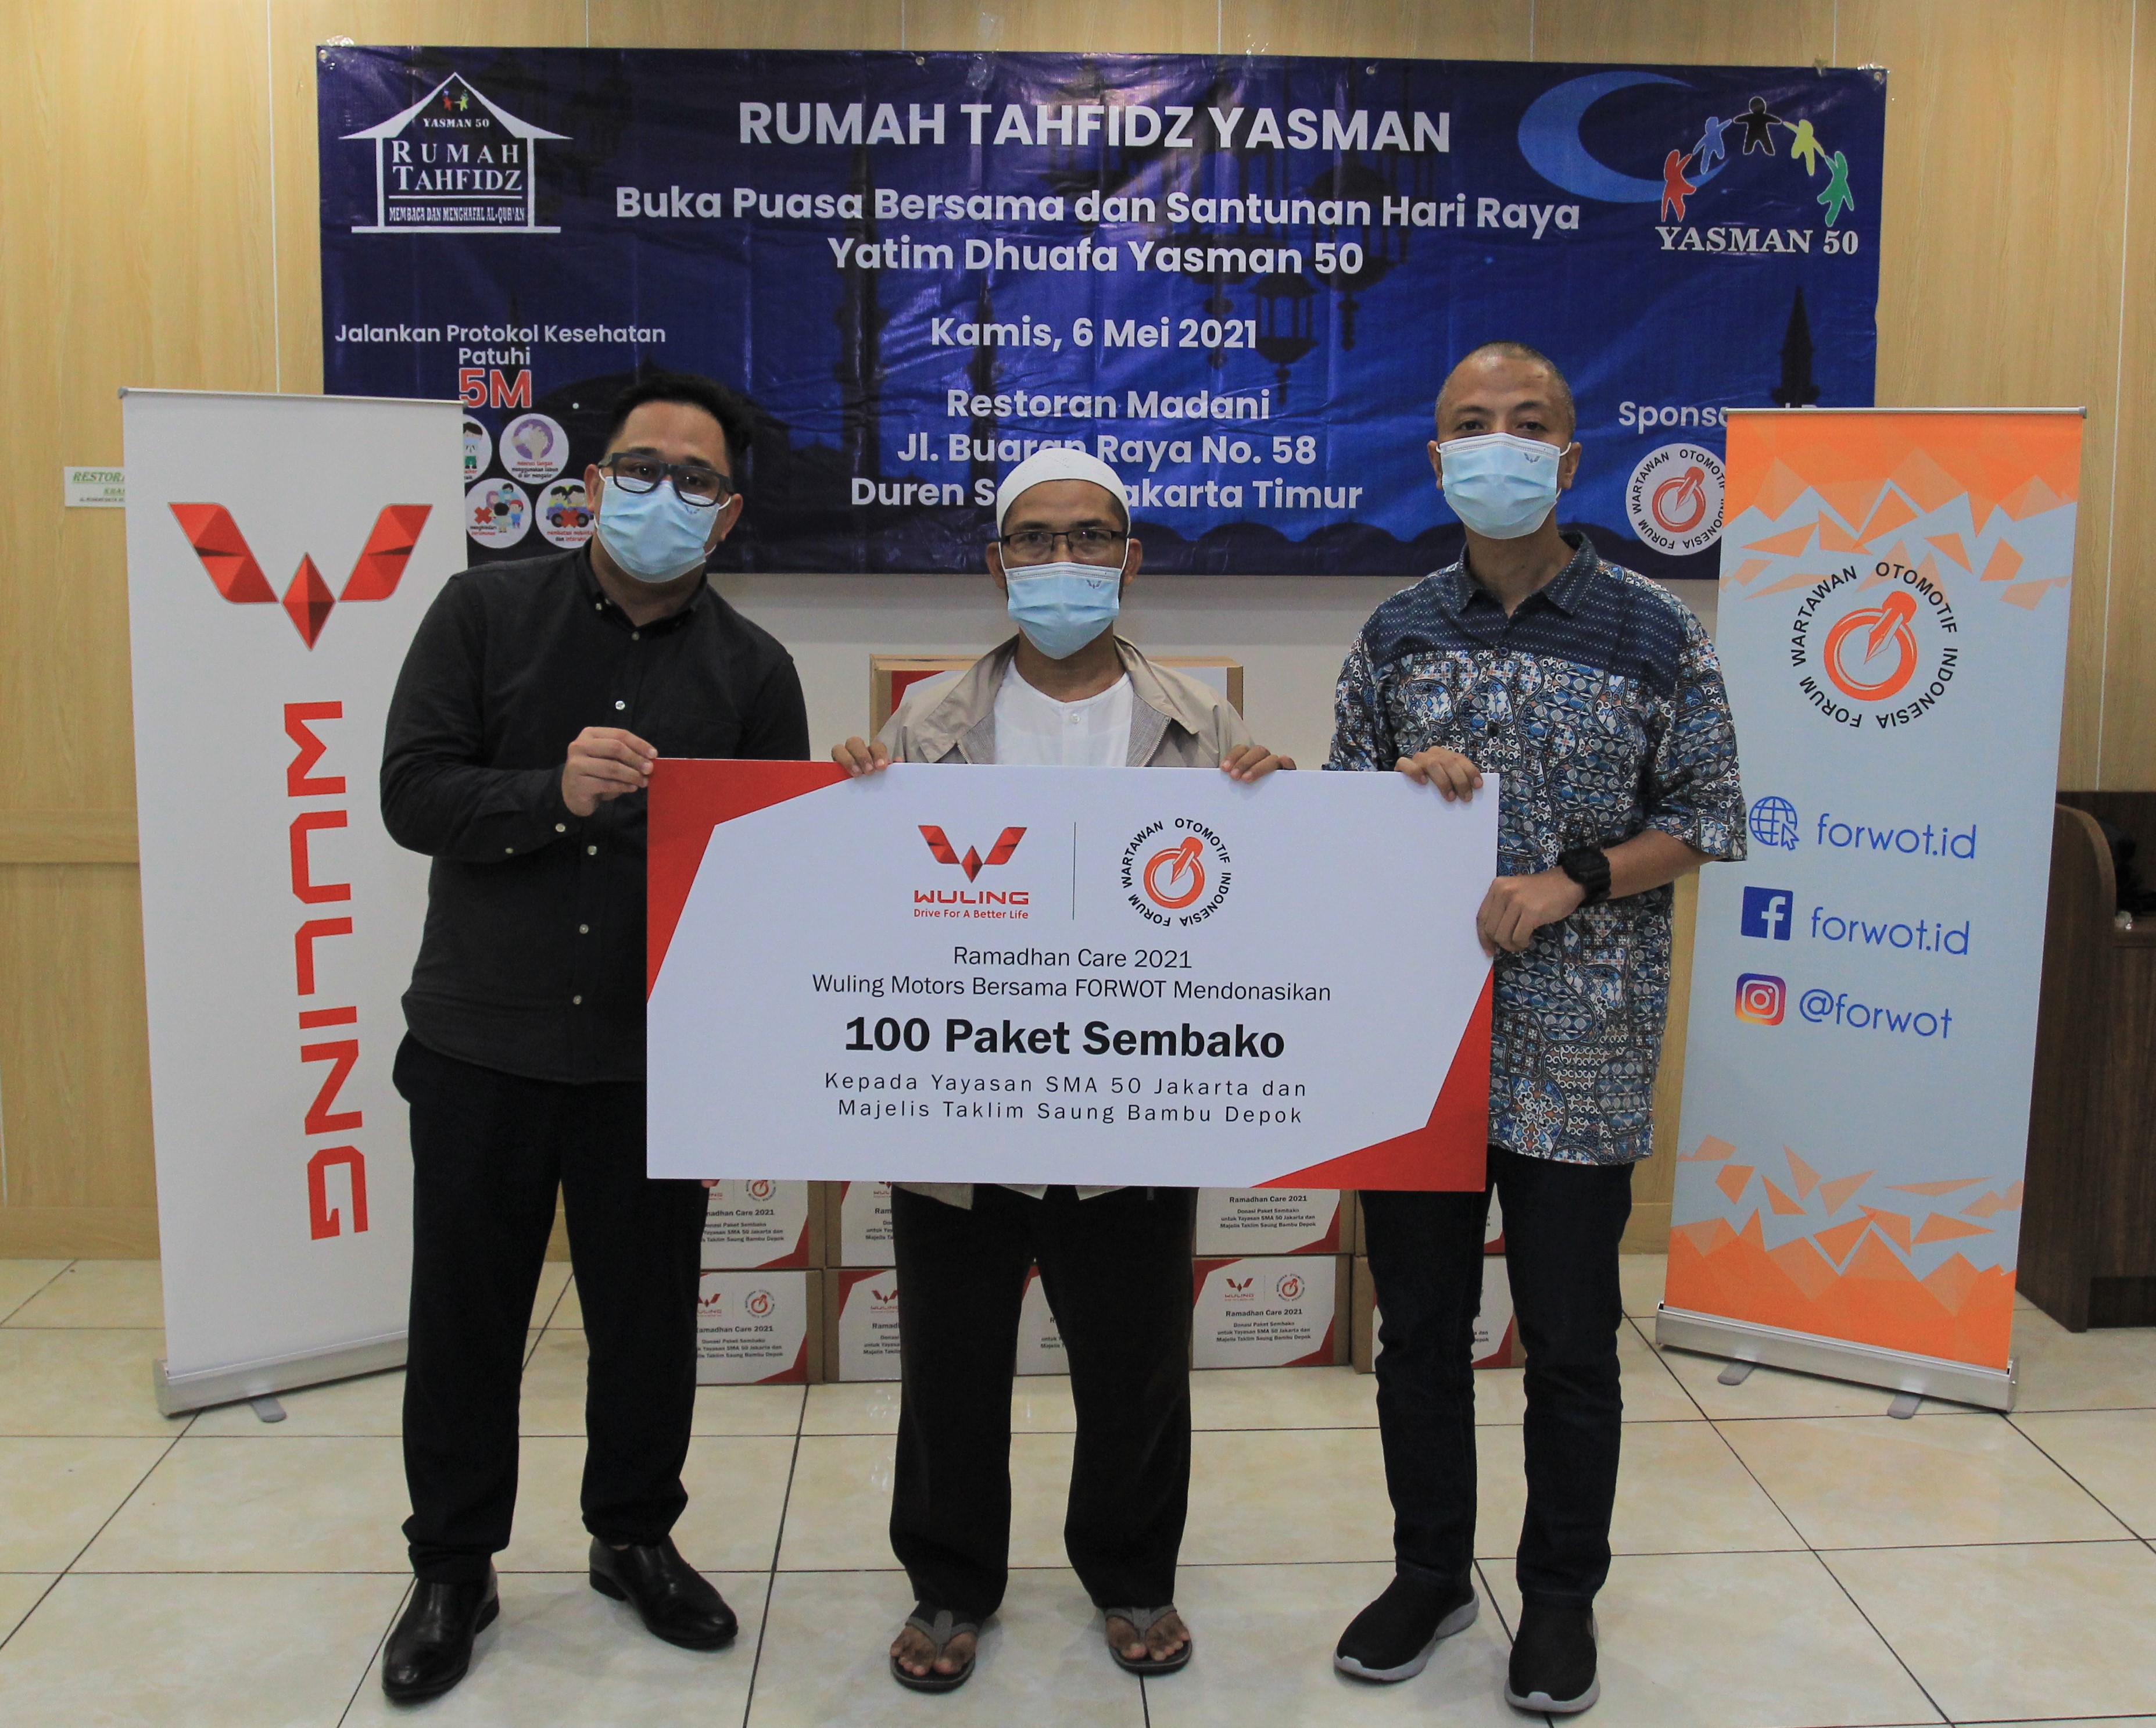 Image Wuling Motors Collaborates with FORWOT in Ramadhan Care 2021